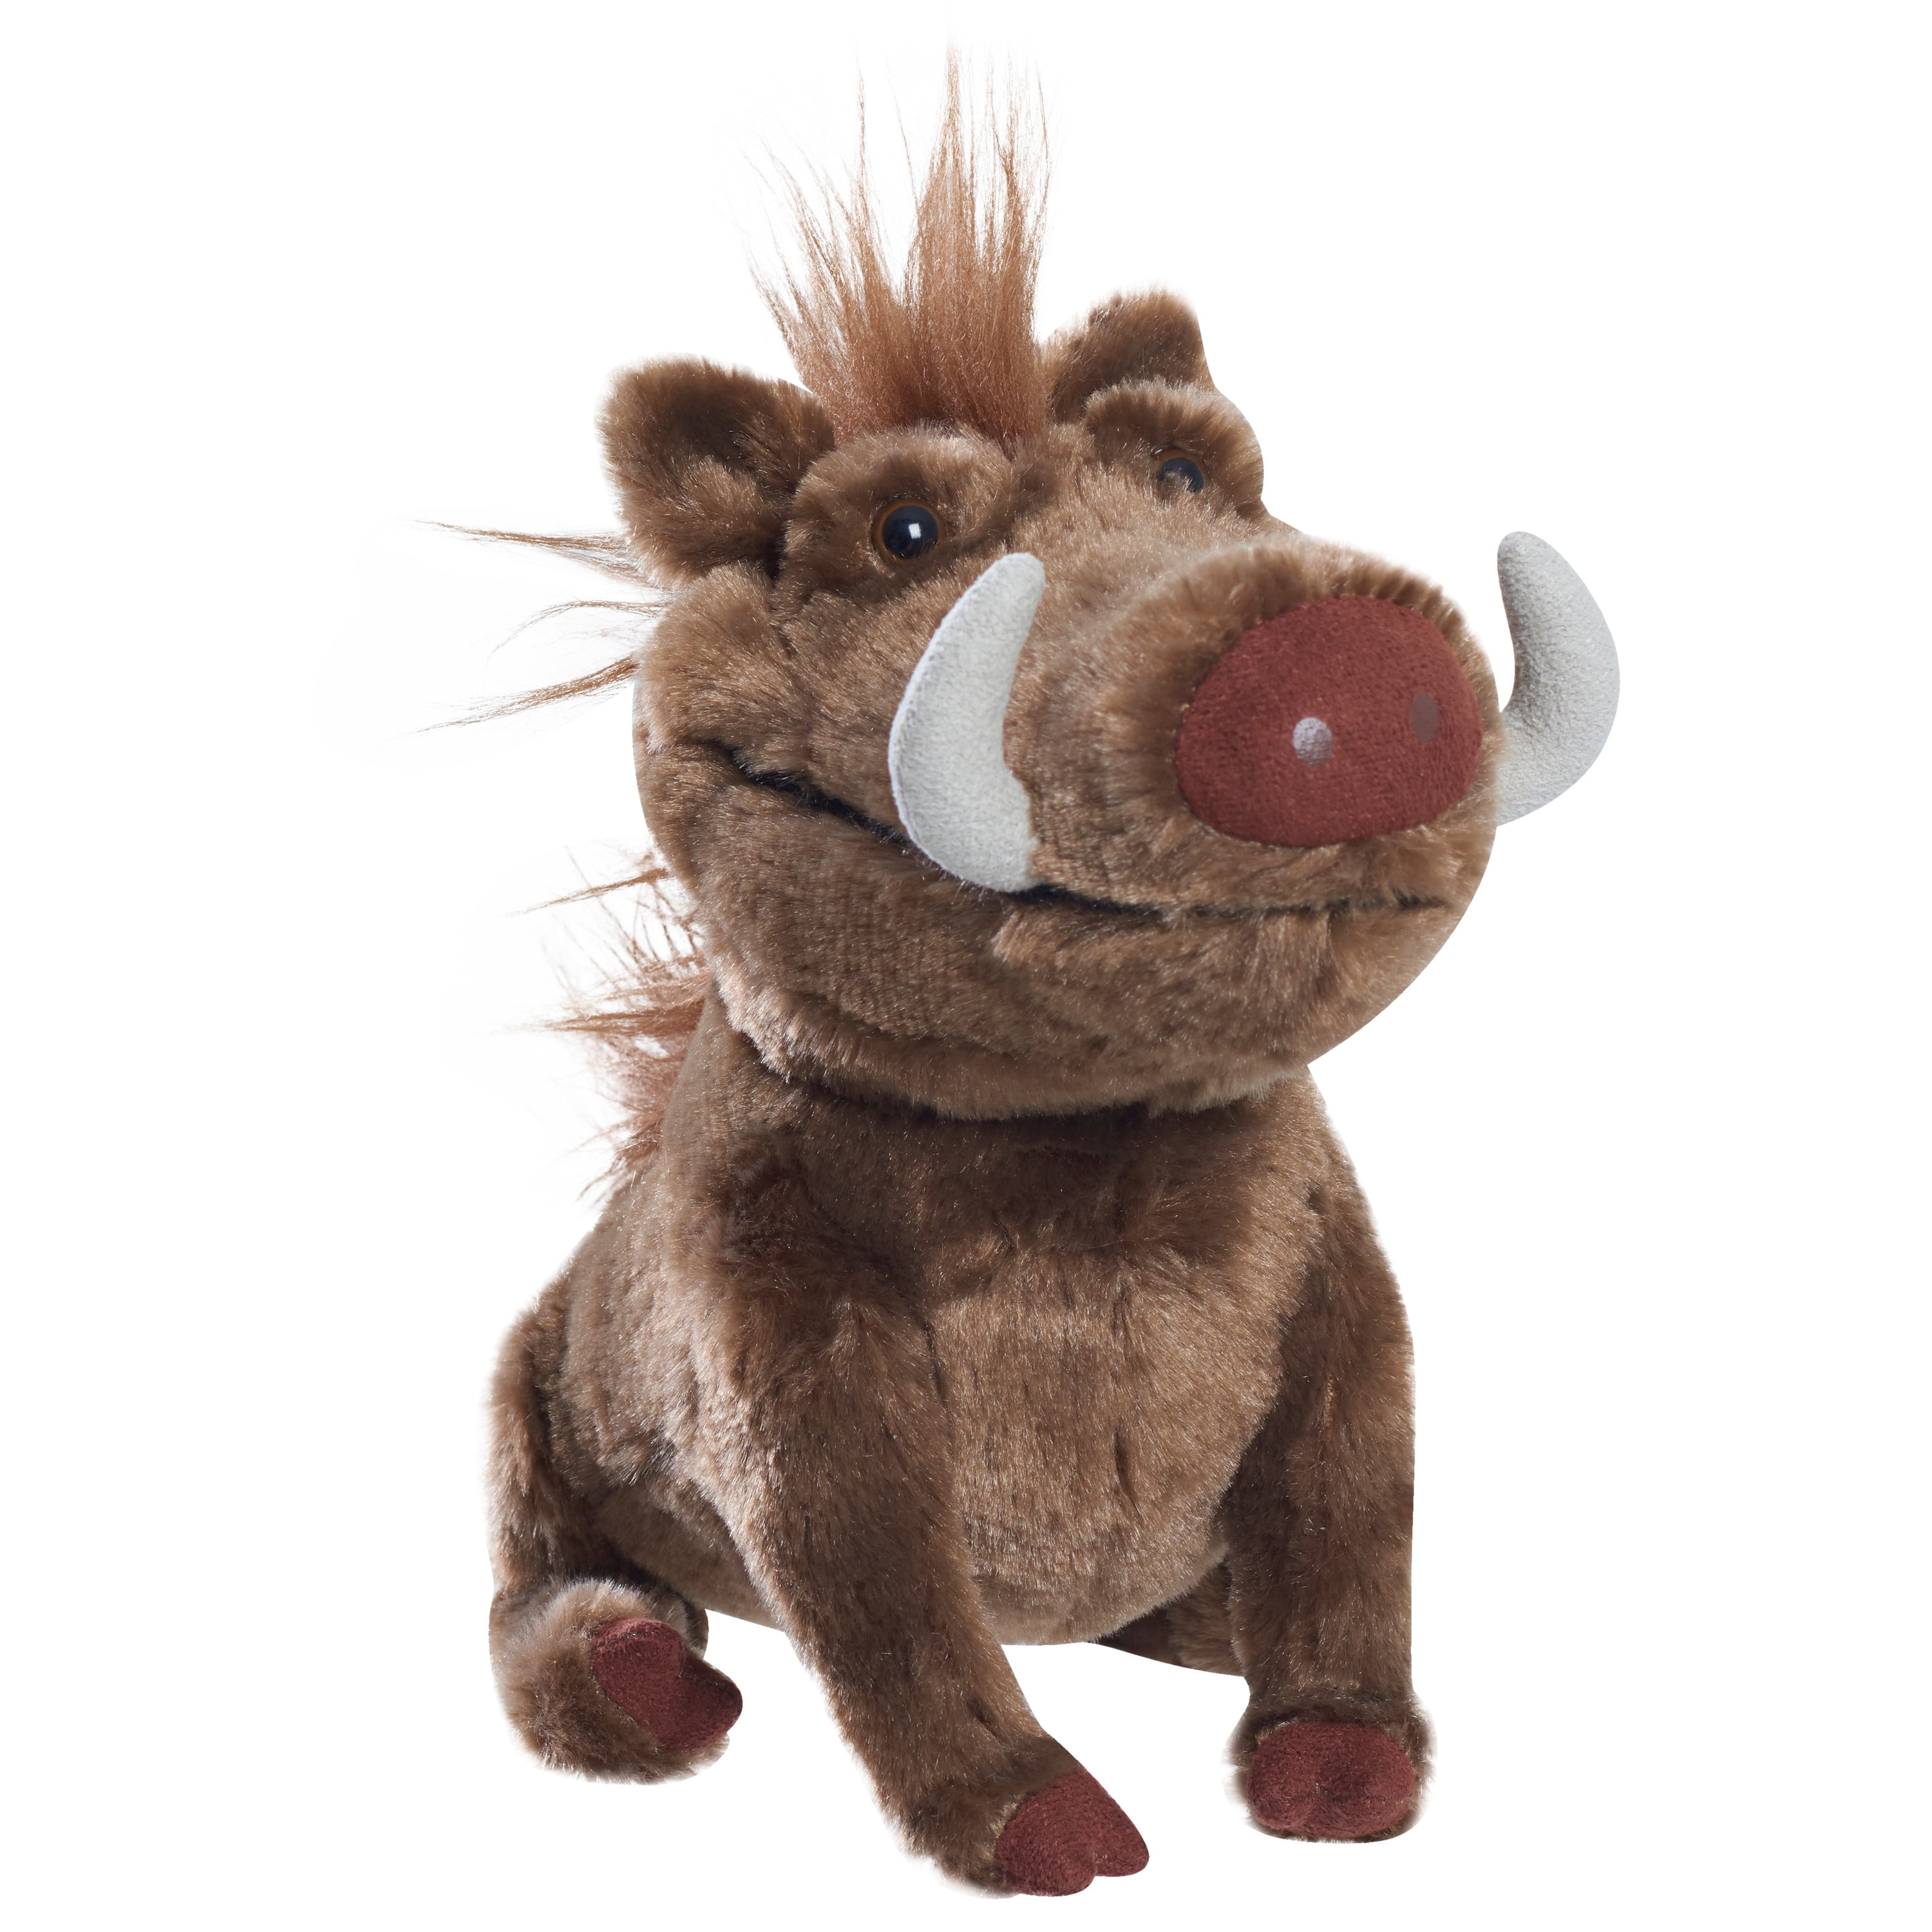 Disney's The Lion King Talking Small Plush, Pumbaa, Officially Licensed  Kids Toys for Ages 3 Up, Gifts and Presents 